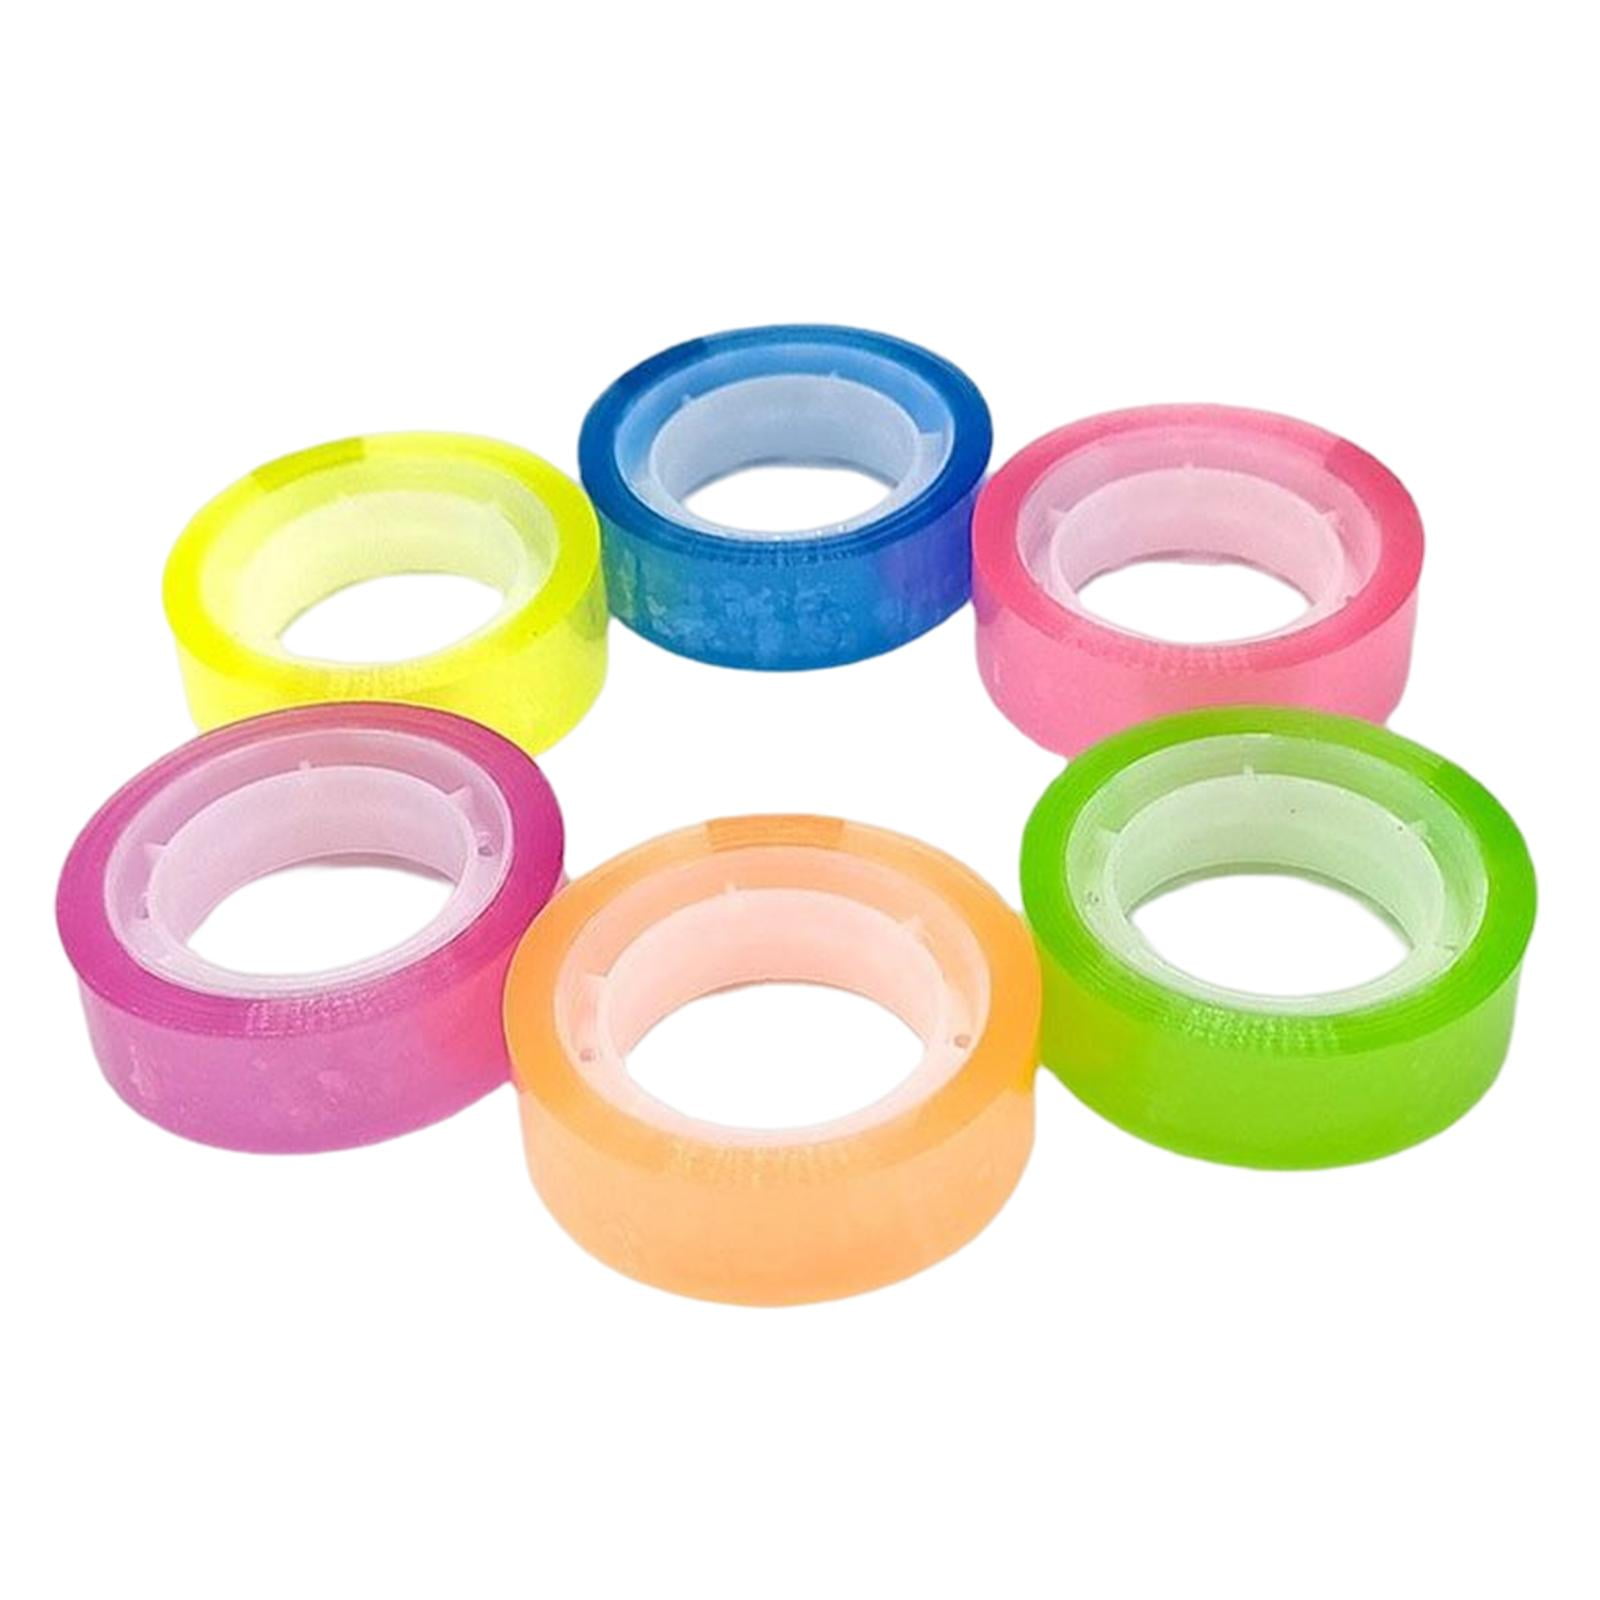  Tofficu 6 Rolls Goo Ball Tape Decompression Ball Toy Juguetes  Adultos Ball Sticky Tape Ball Adhesive Colored Tapes Decompression Ball  Tapes for Rainbow Ball Child Plastic Manual : Office Products